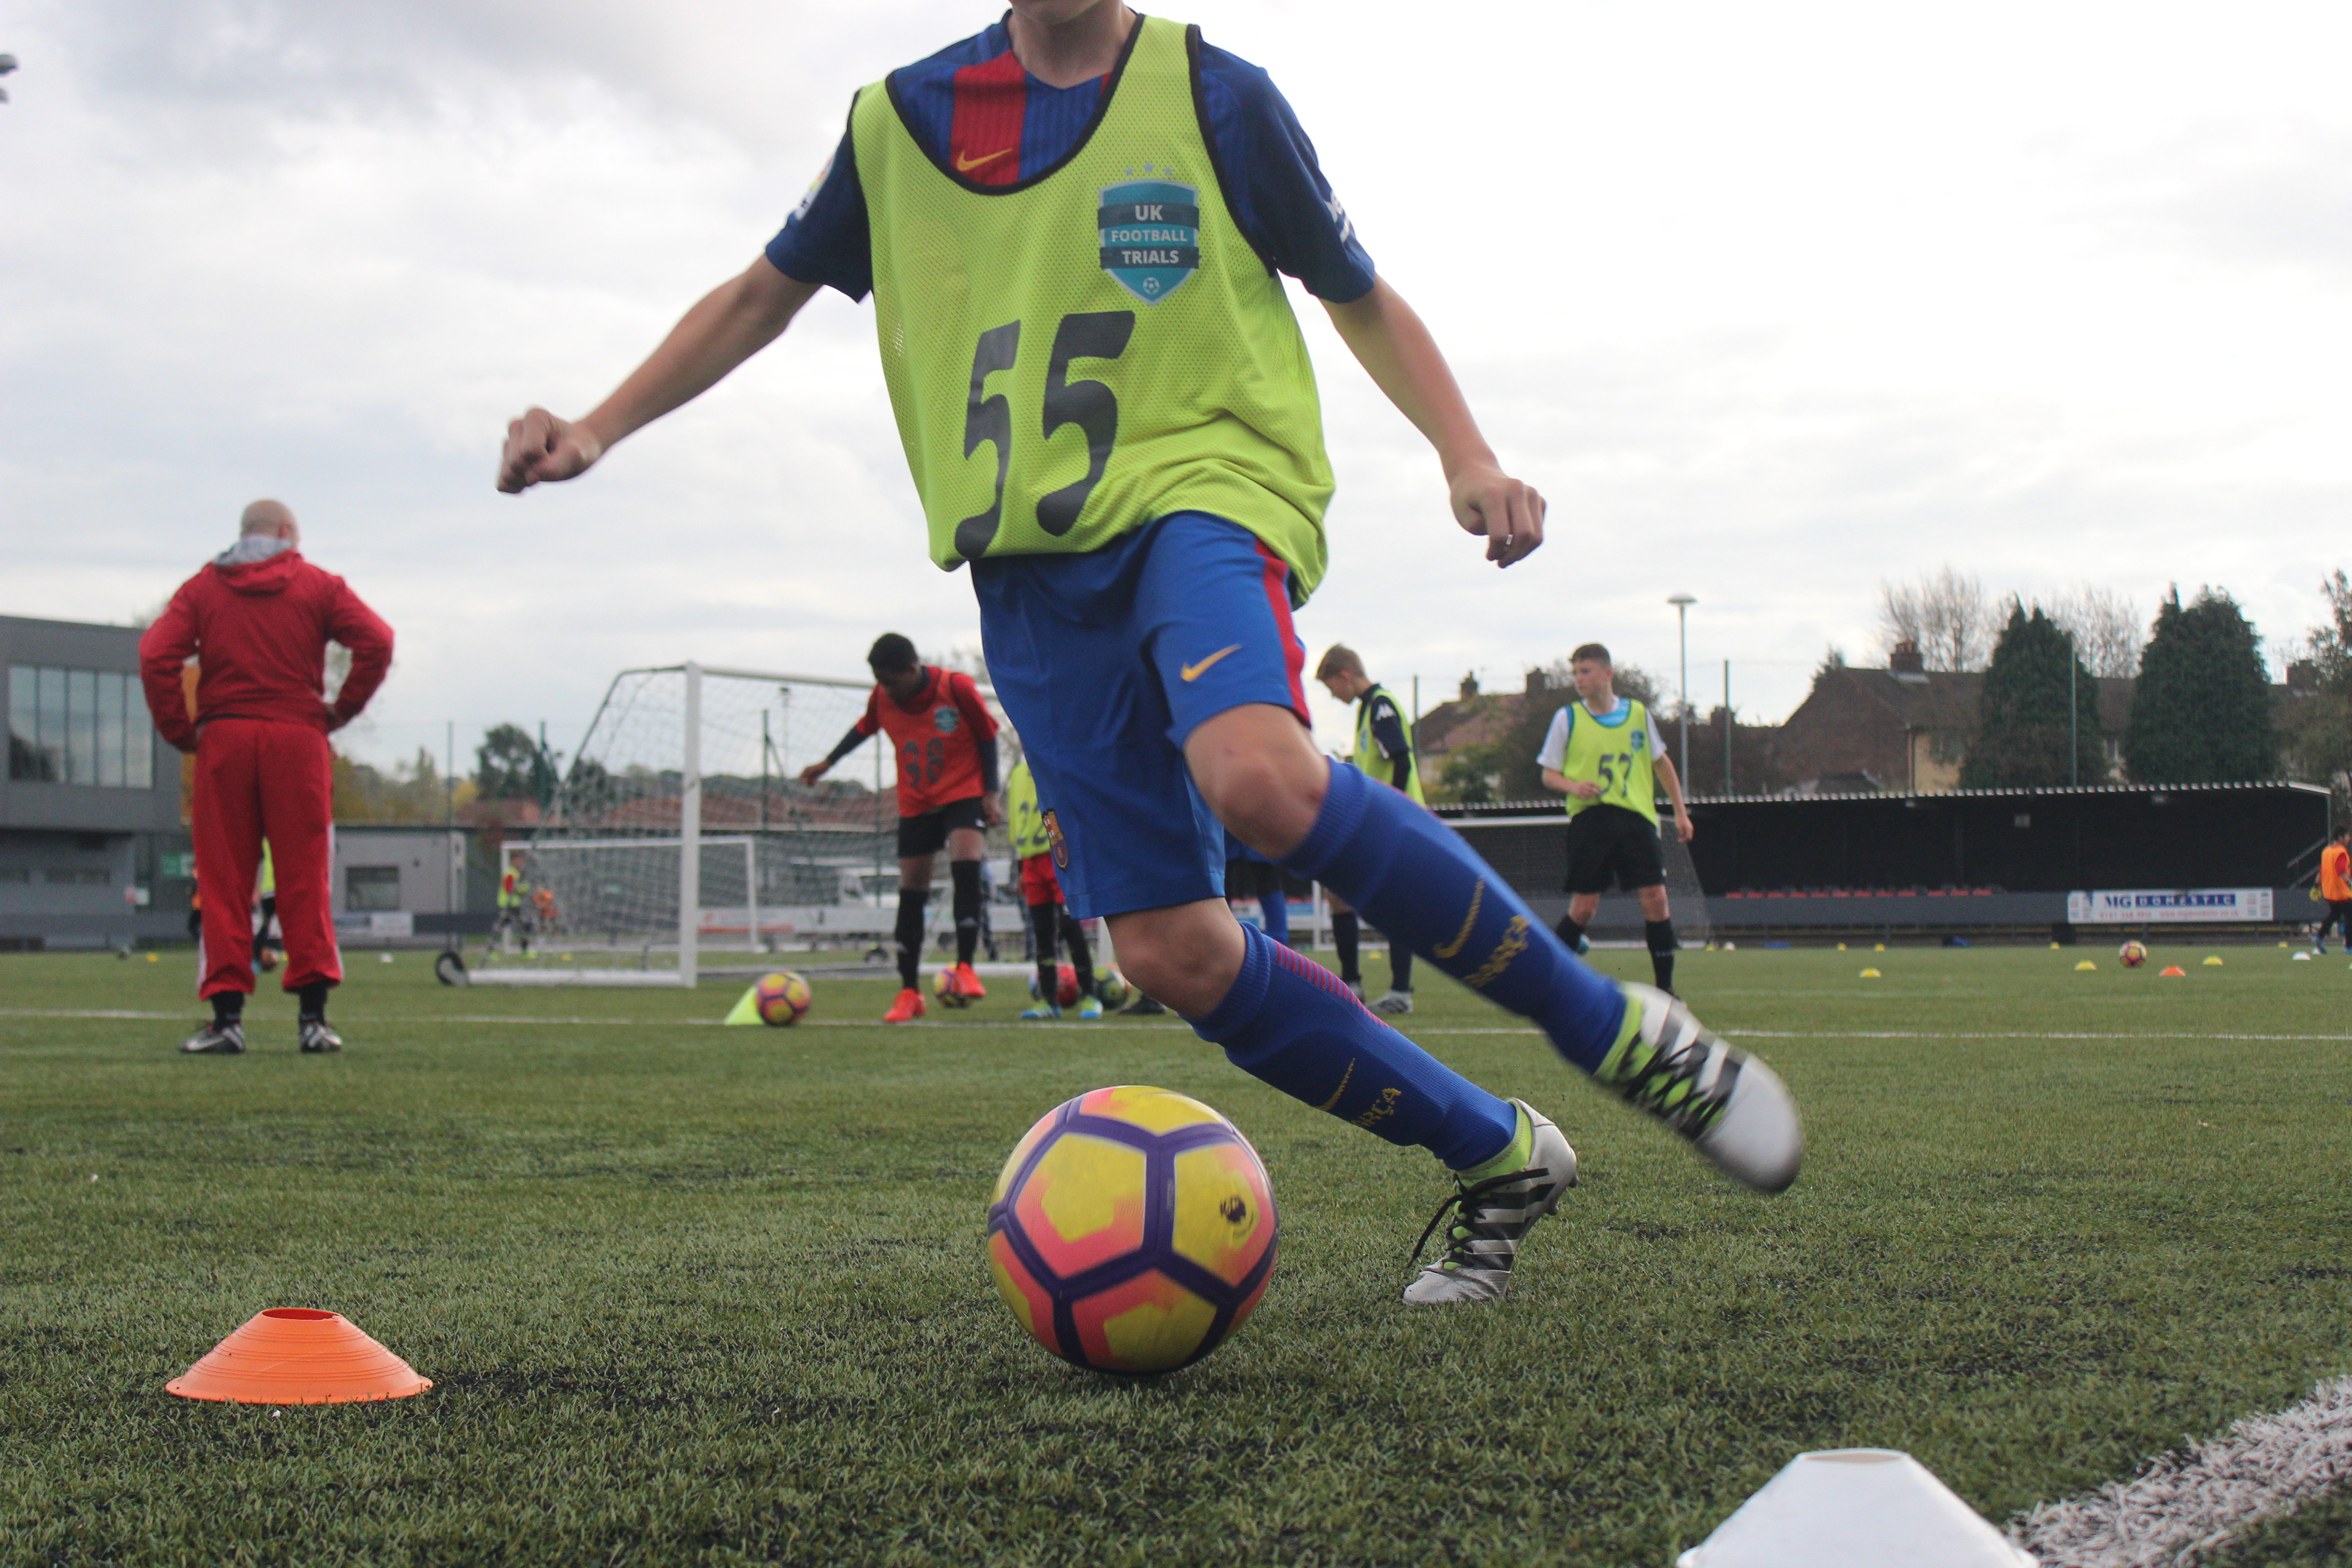 70,000 Players on UK Football Trials Books 